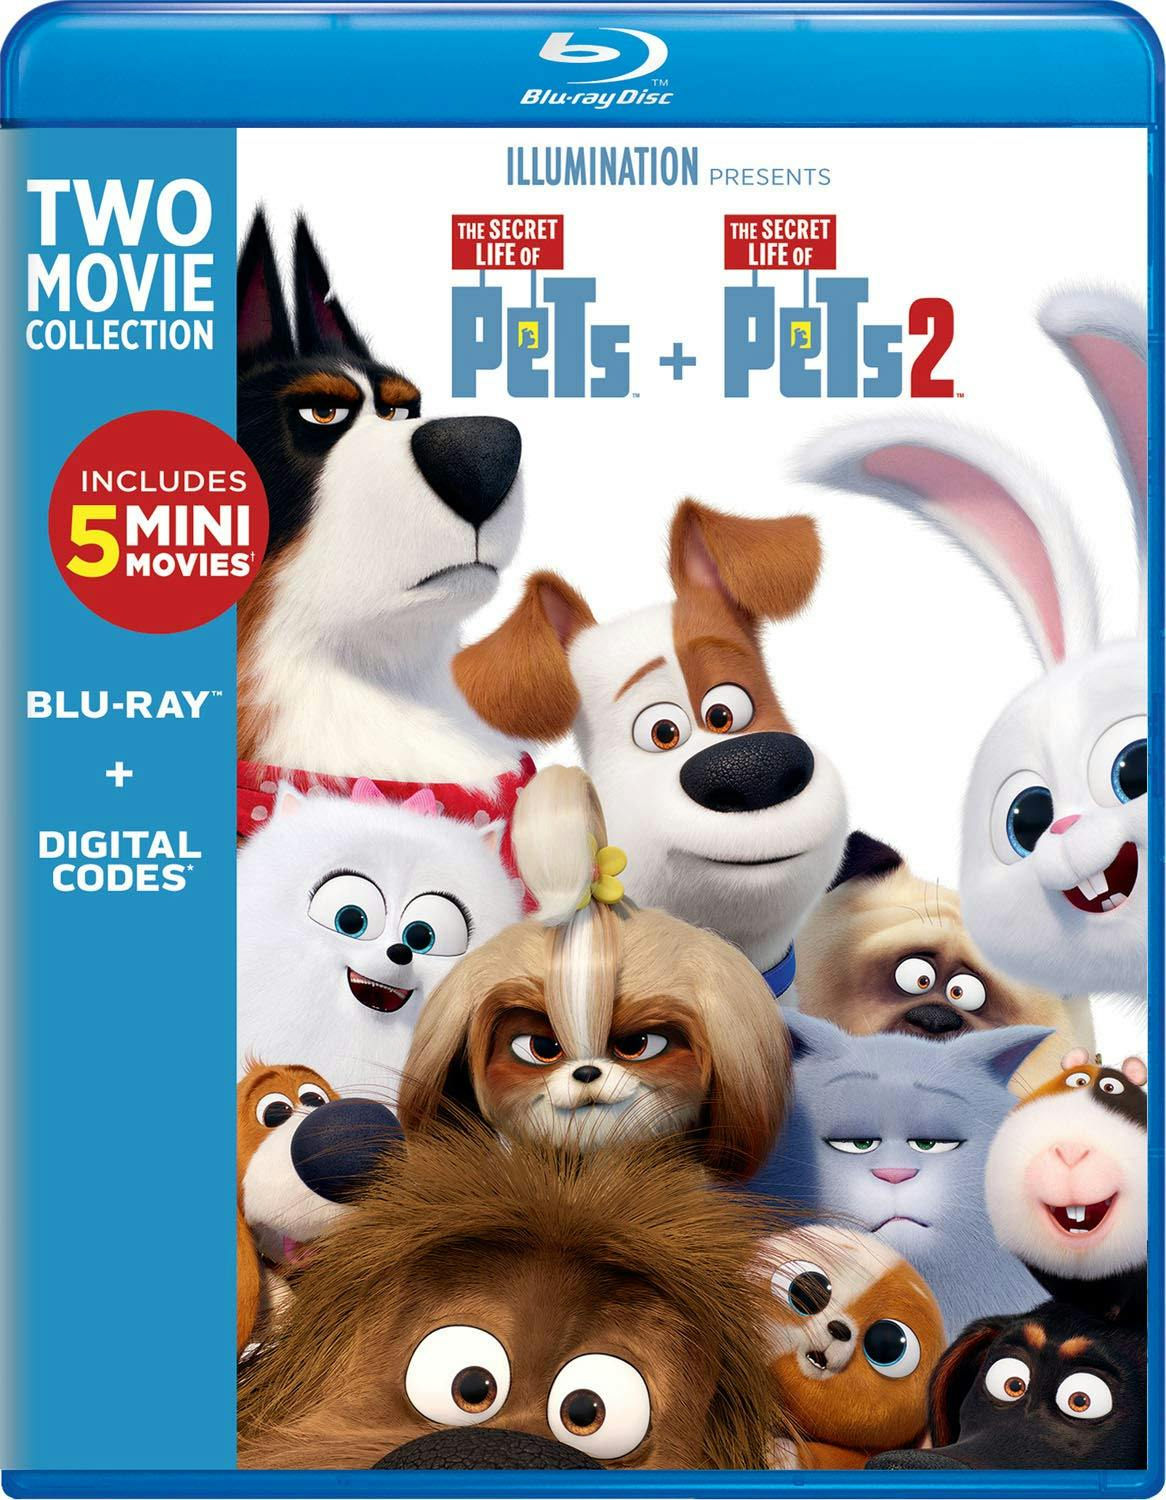 The Secret Life of Pets 1 u0026 2 (Blu-ray Double Feature) [Blu-ray]